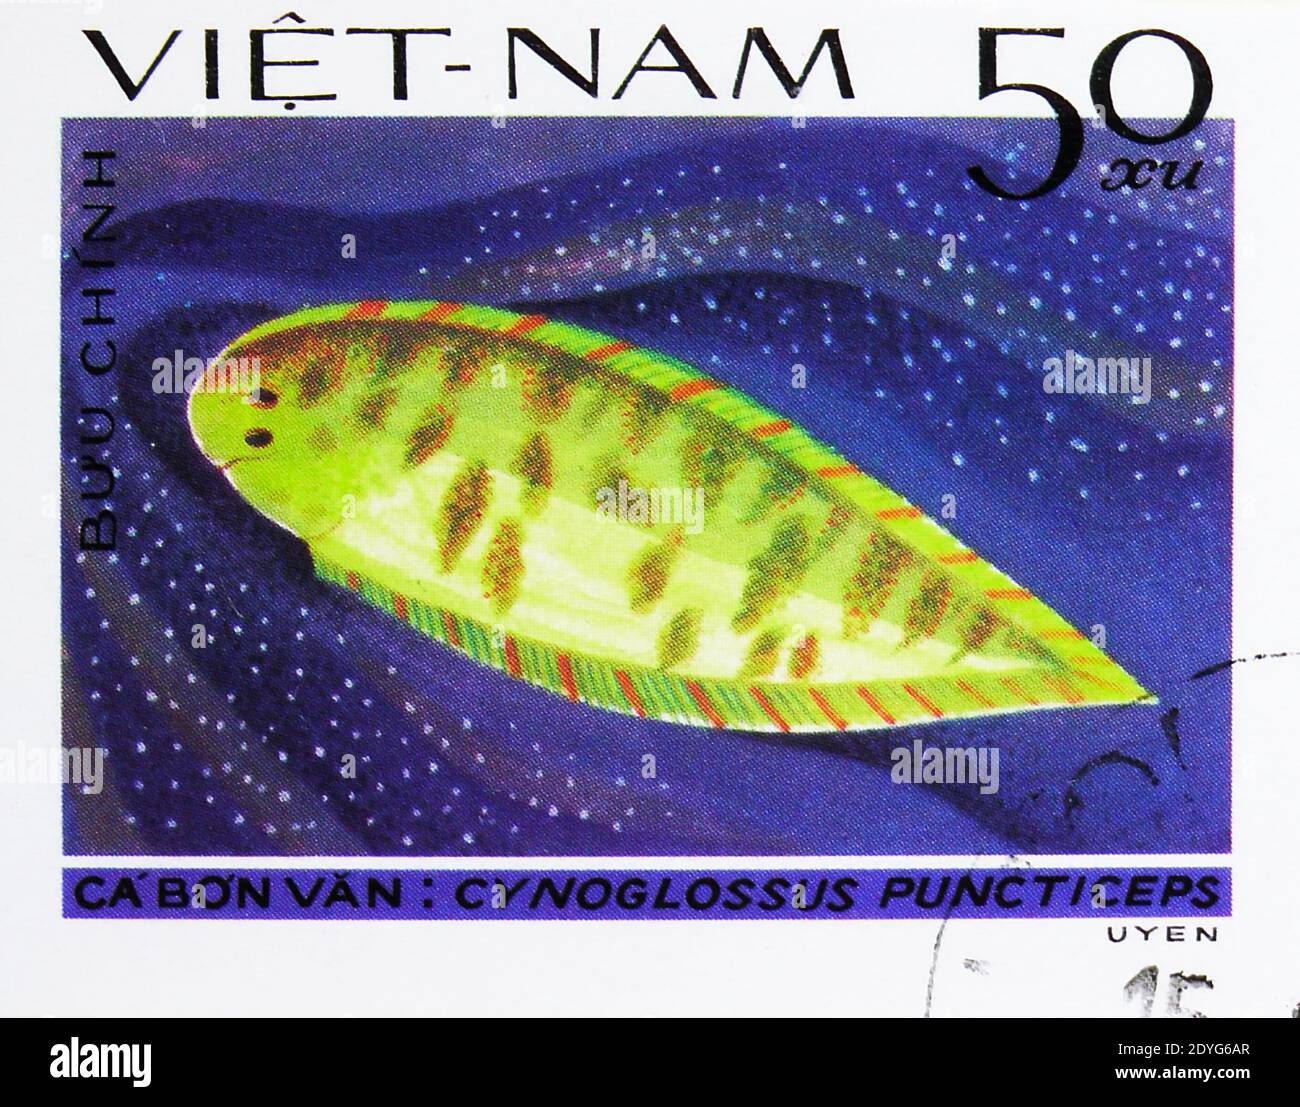 MOSCOW, RUSSIA - AUGUST 4, 2019: Postage stamp printed in Vietnam shows Speckled Tongue-sole (Cynoglossus puncticeps), Fish - Soles / Flatfish serie, Stock Photo